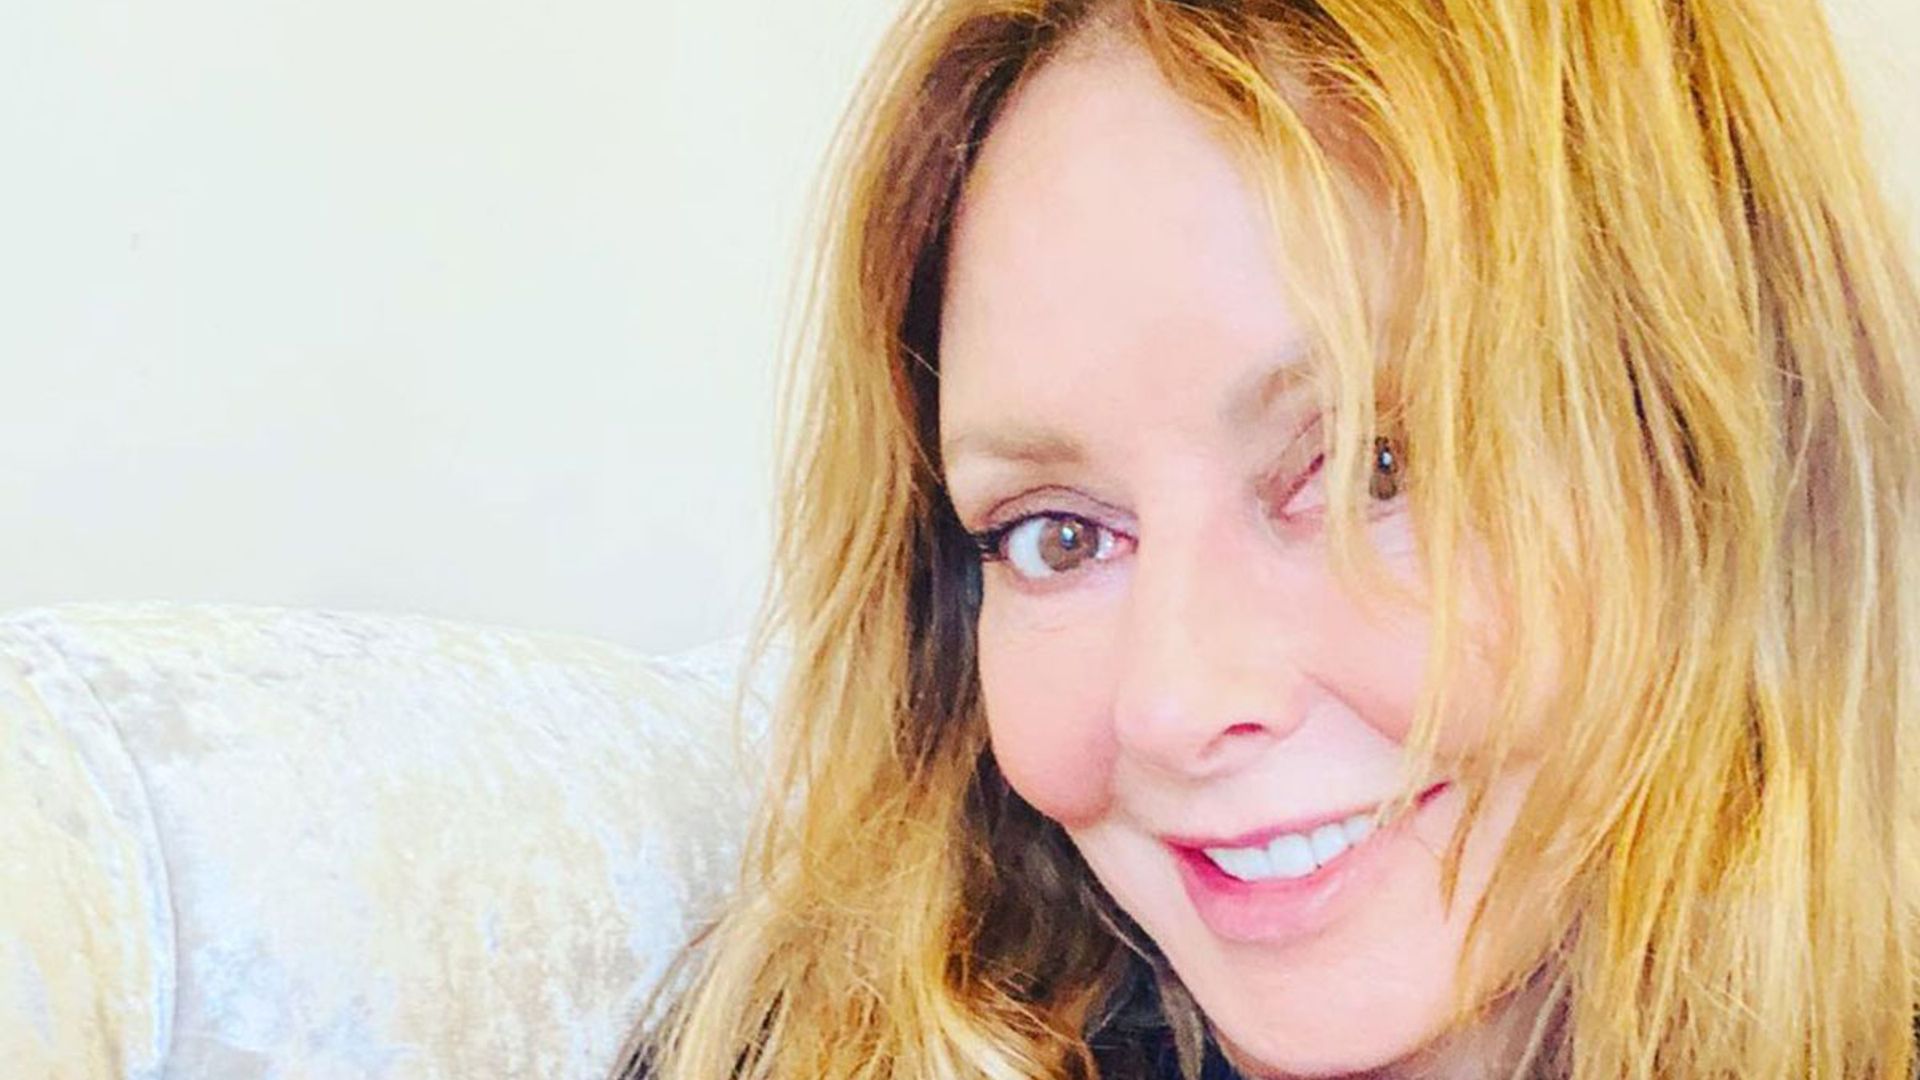 Carol Vorderman poses in figure-hugging activewear and she pleads with fans for help